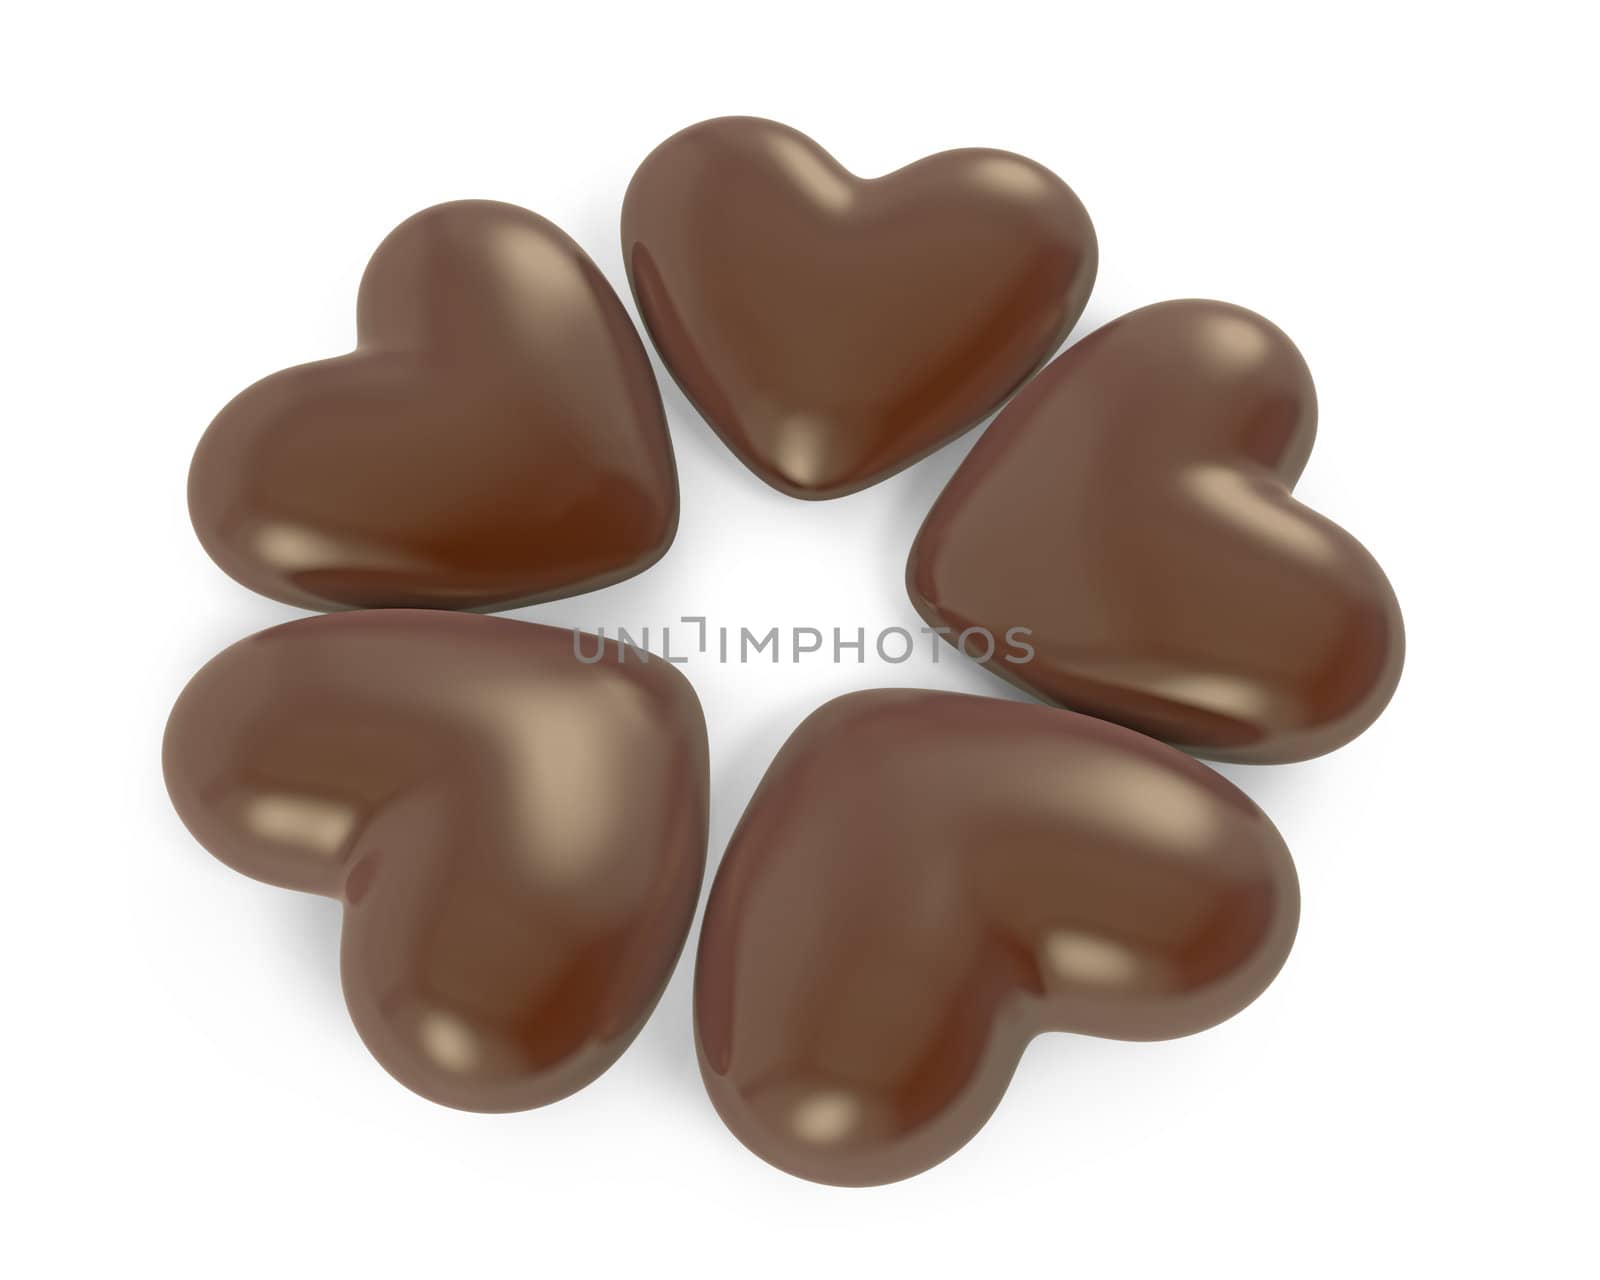 Five heart shaped chocolate candies by Zelfit